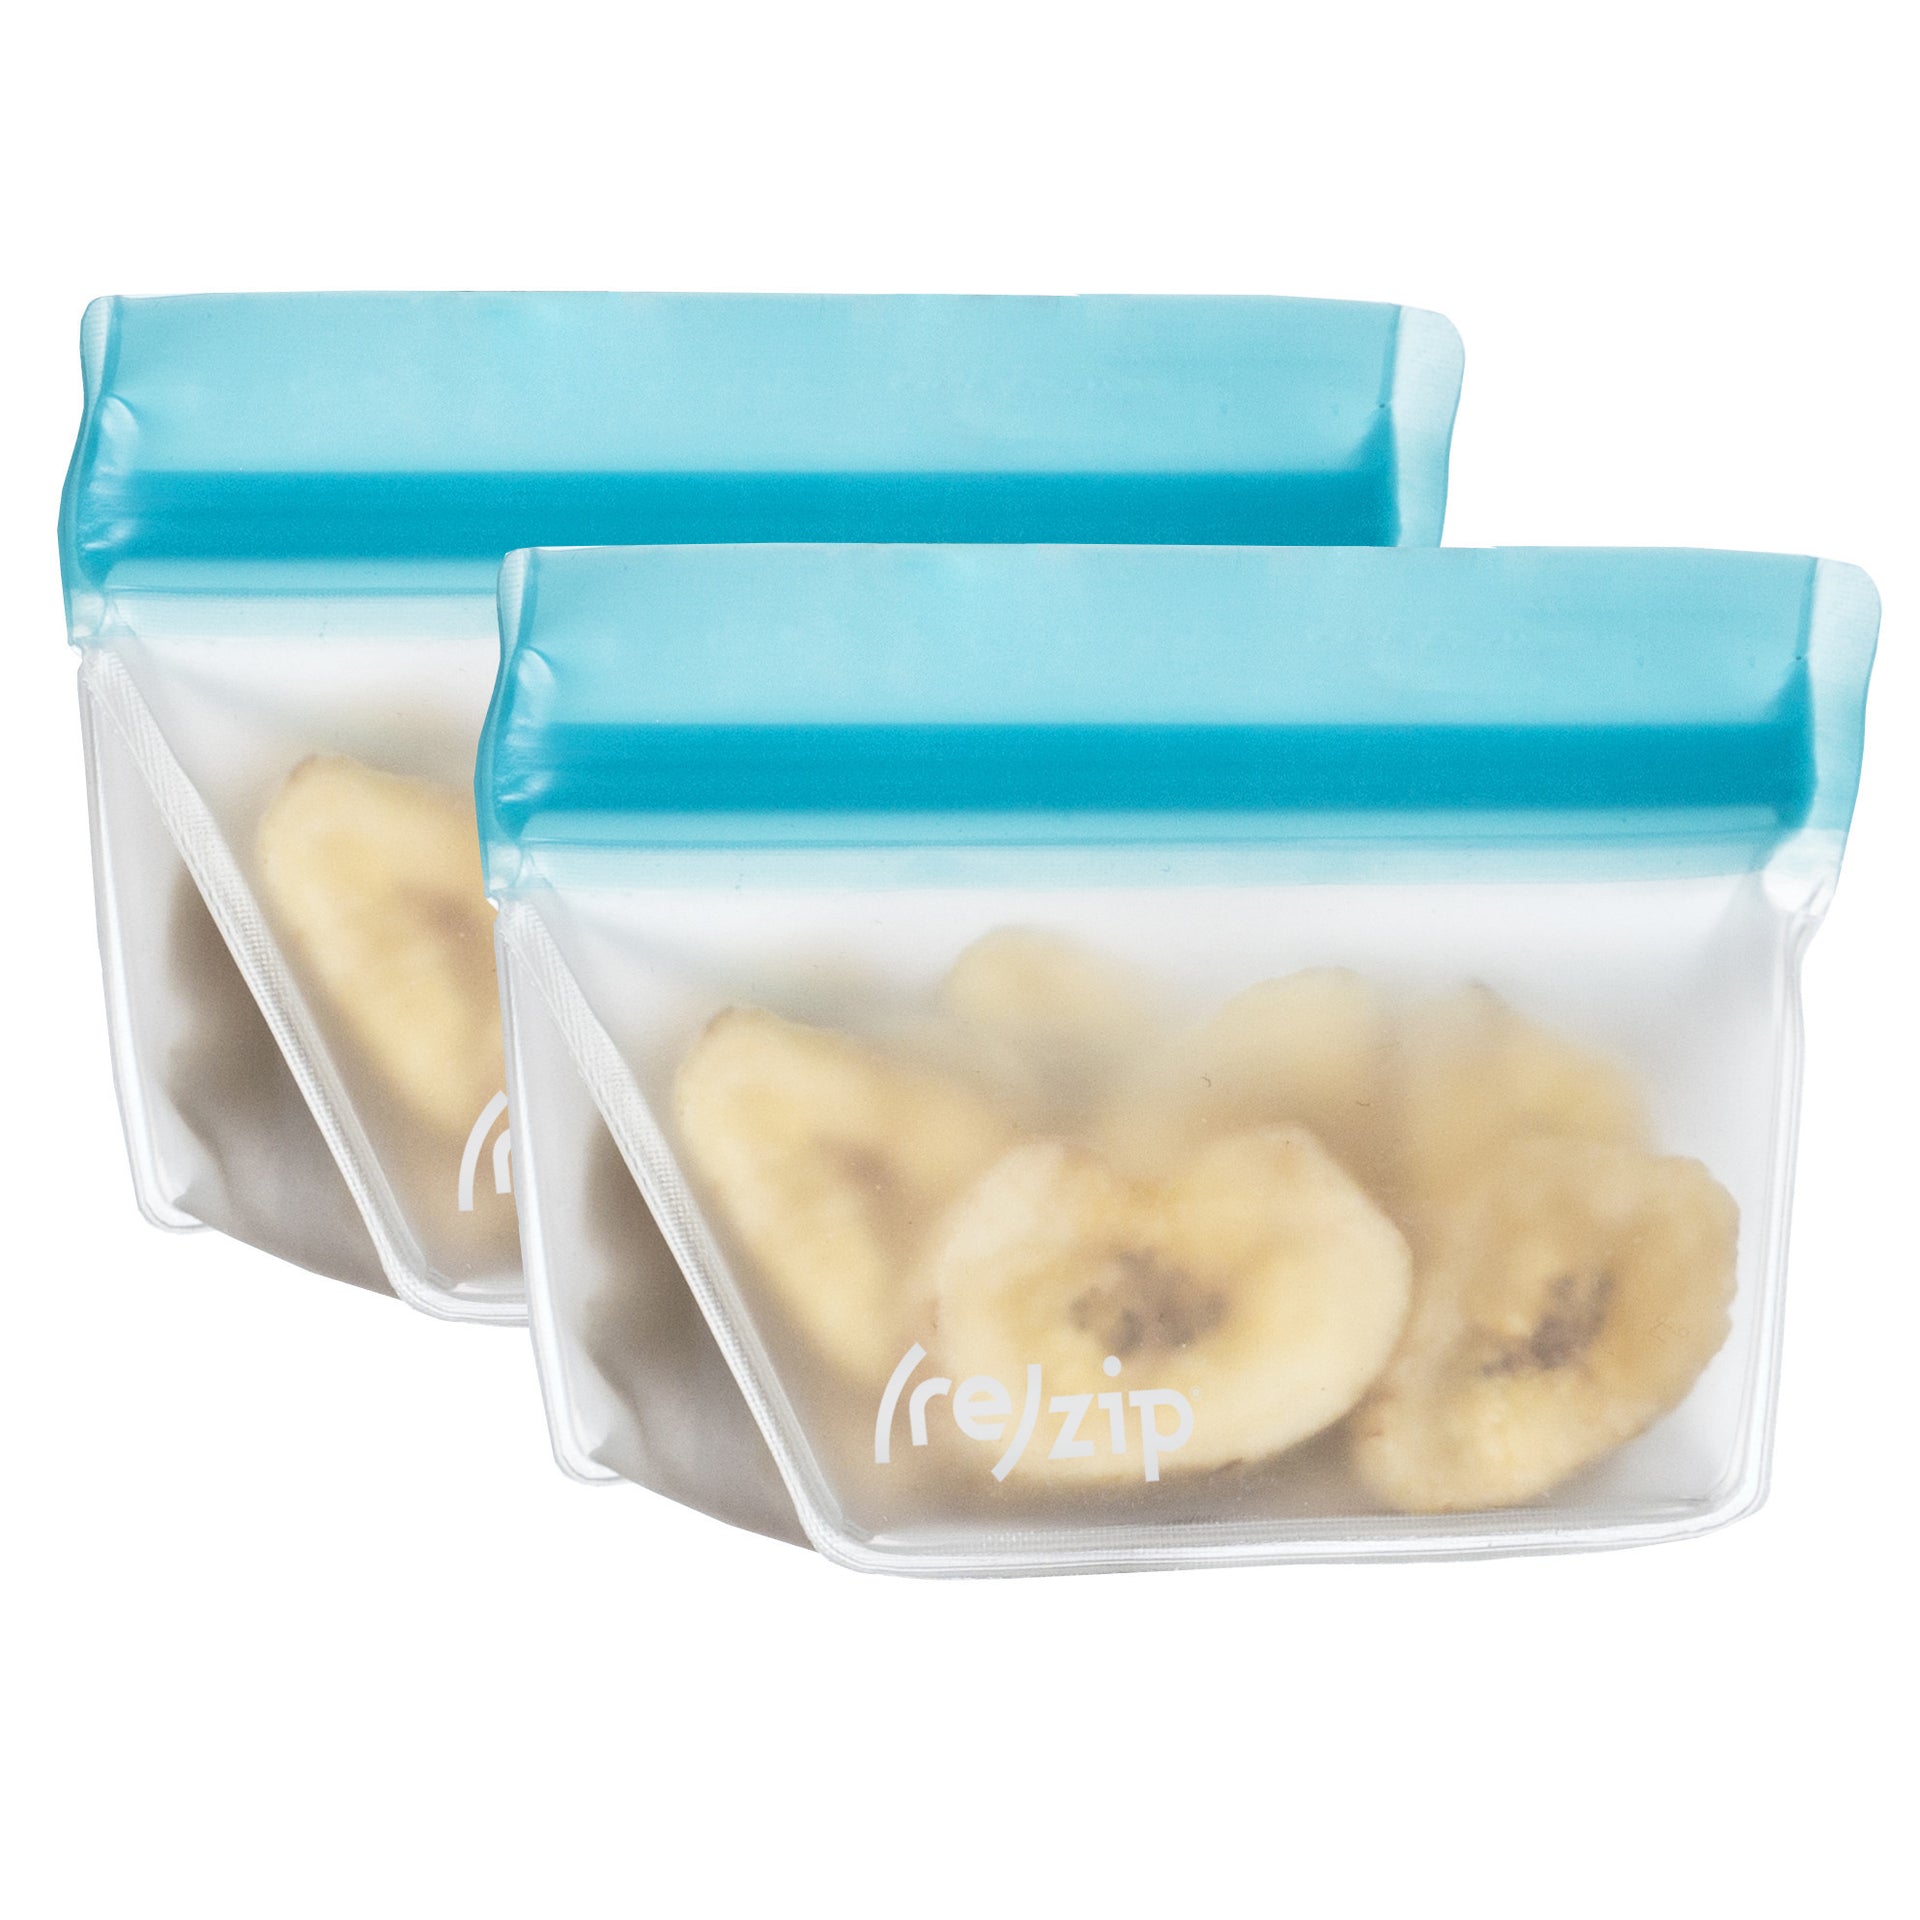 (re)zip Reusable Leak-proof Food Storage Bag Kit - Mini and Snack Stand-Up,  Flat Snack & Lunch - 8ct